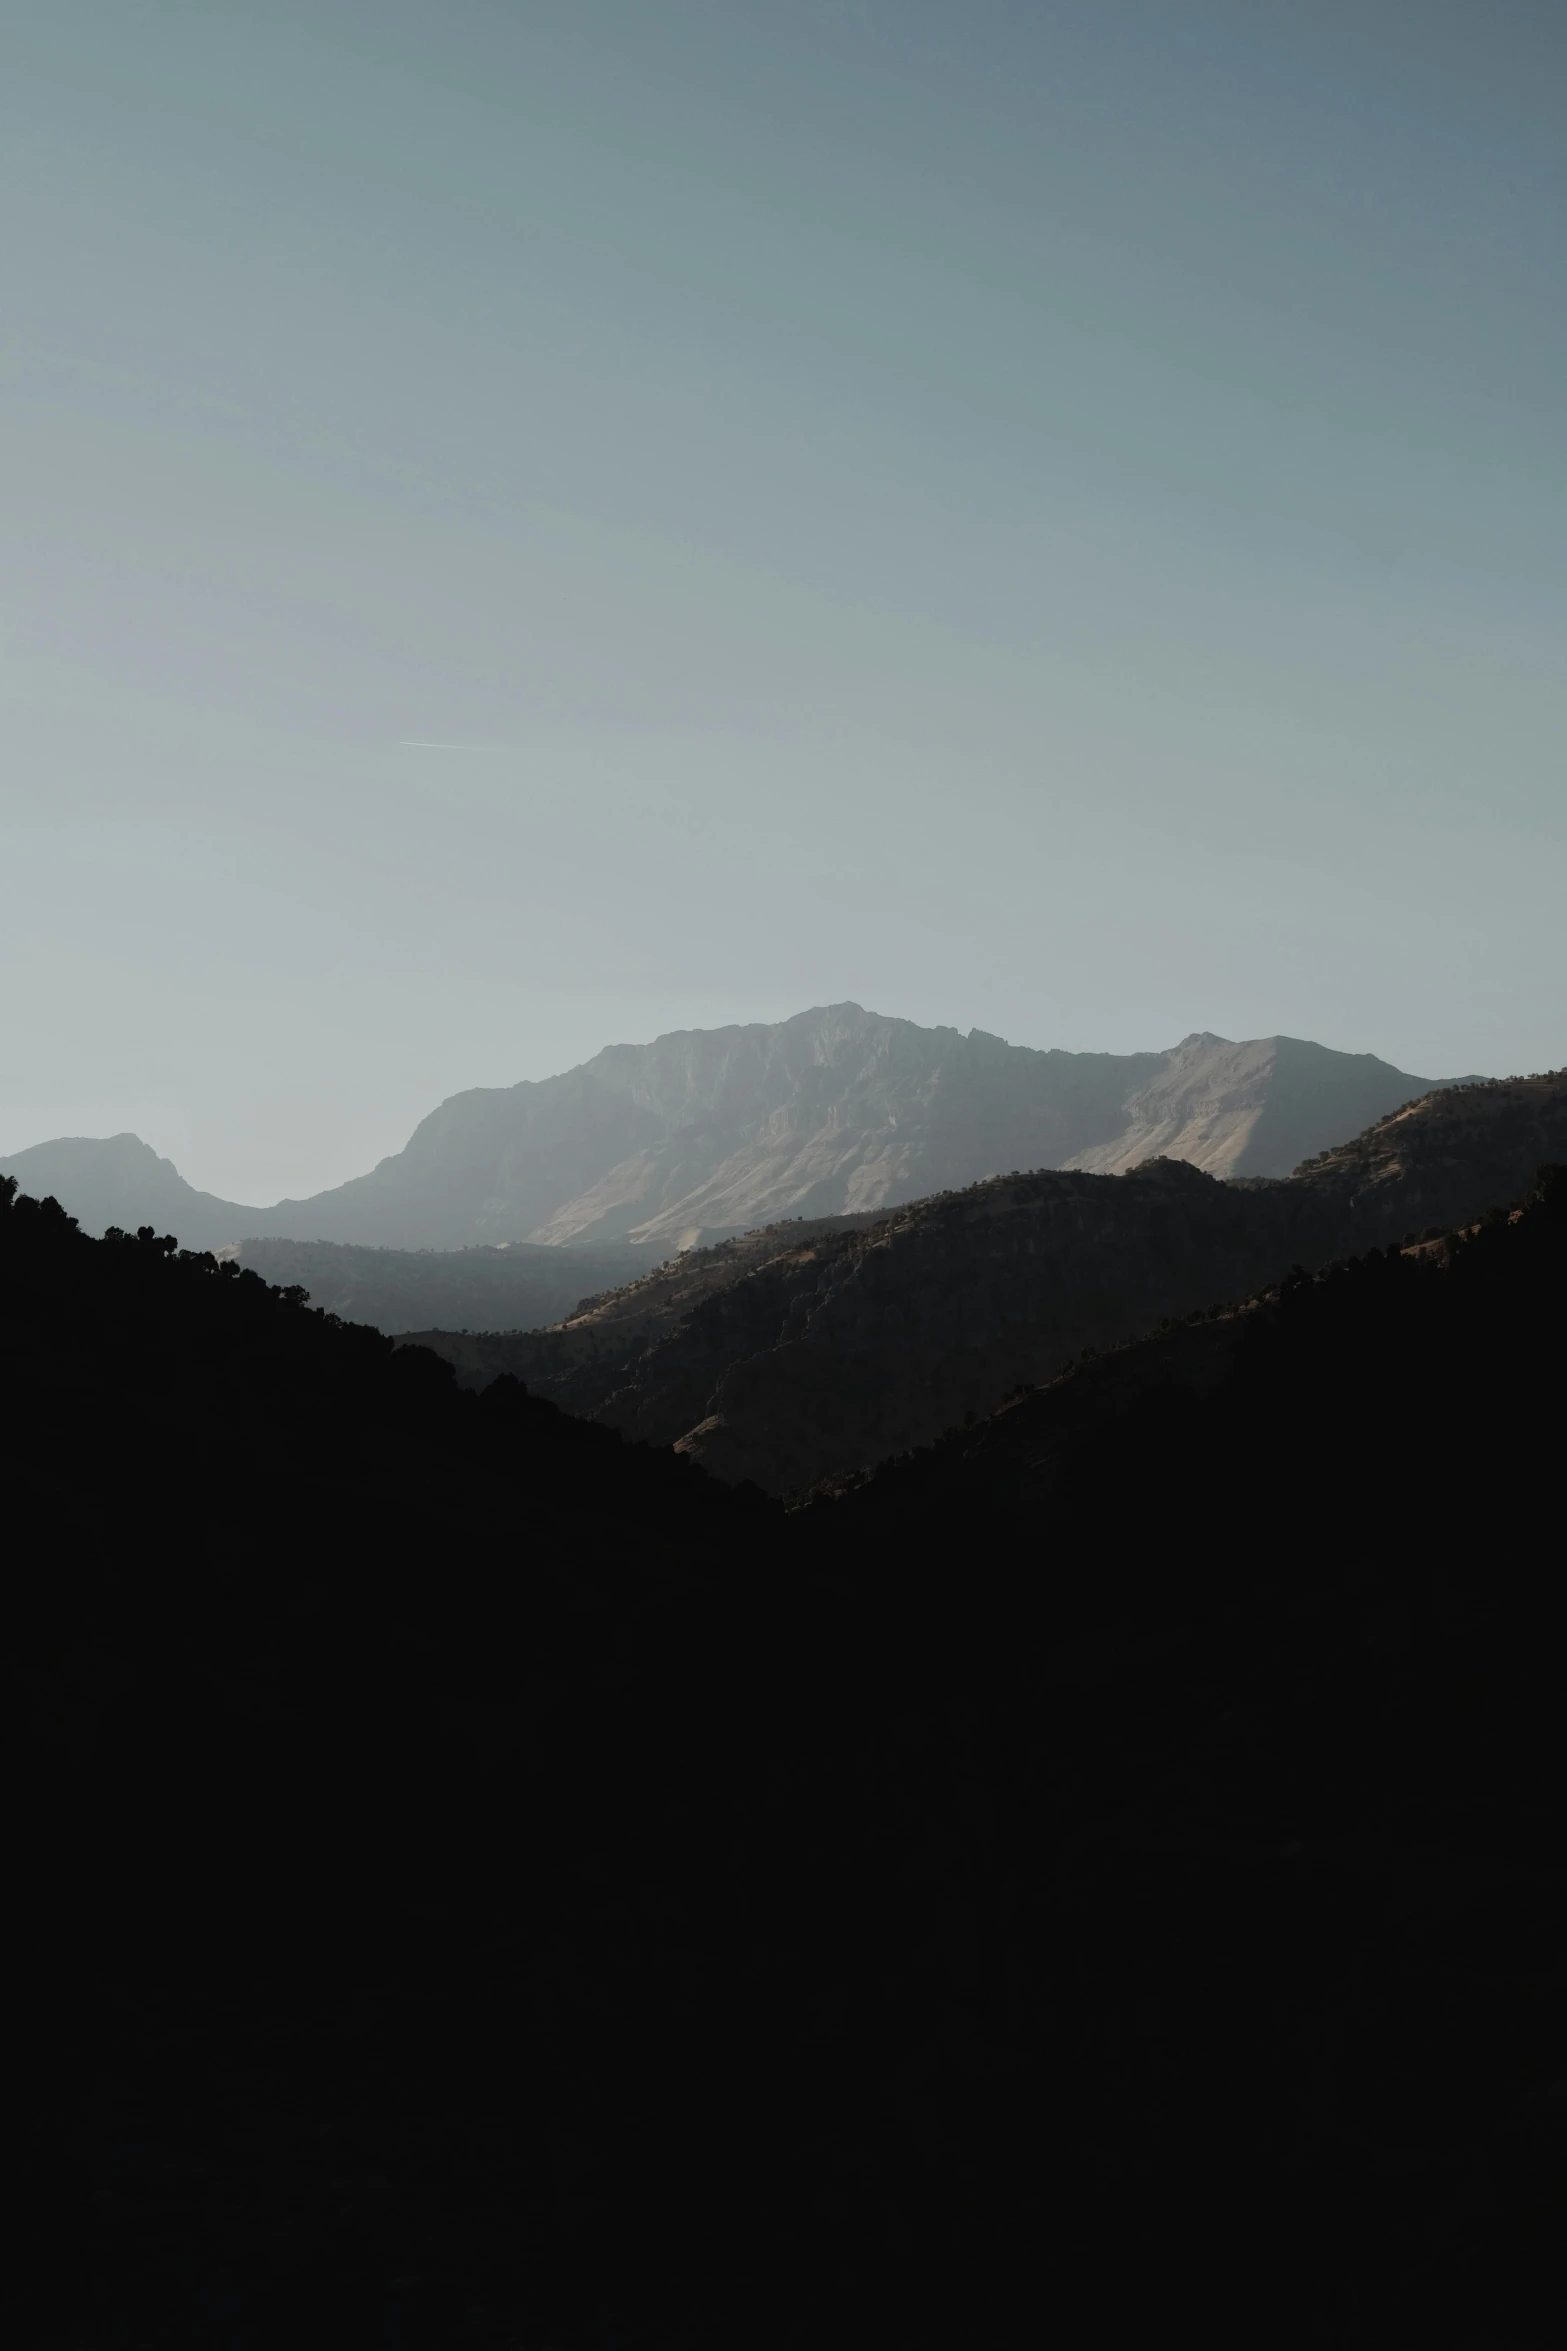 the silhouette of a person standing on top of a mountain, unsplash contest winner, minimalism, morocco, muted dark colors, seen from a distance, mountain ranges